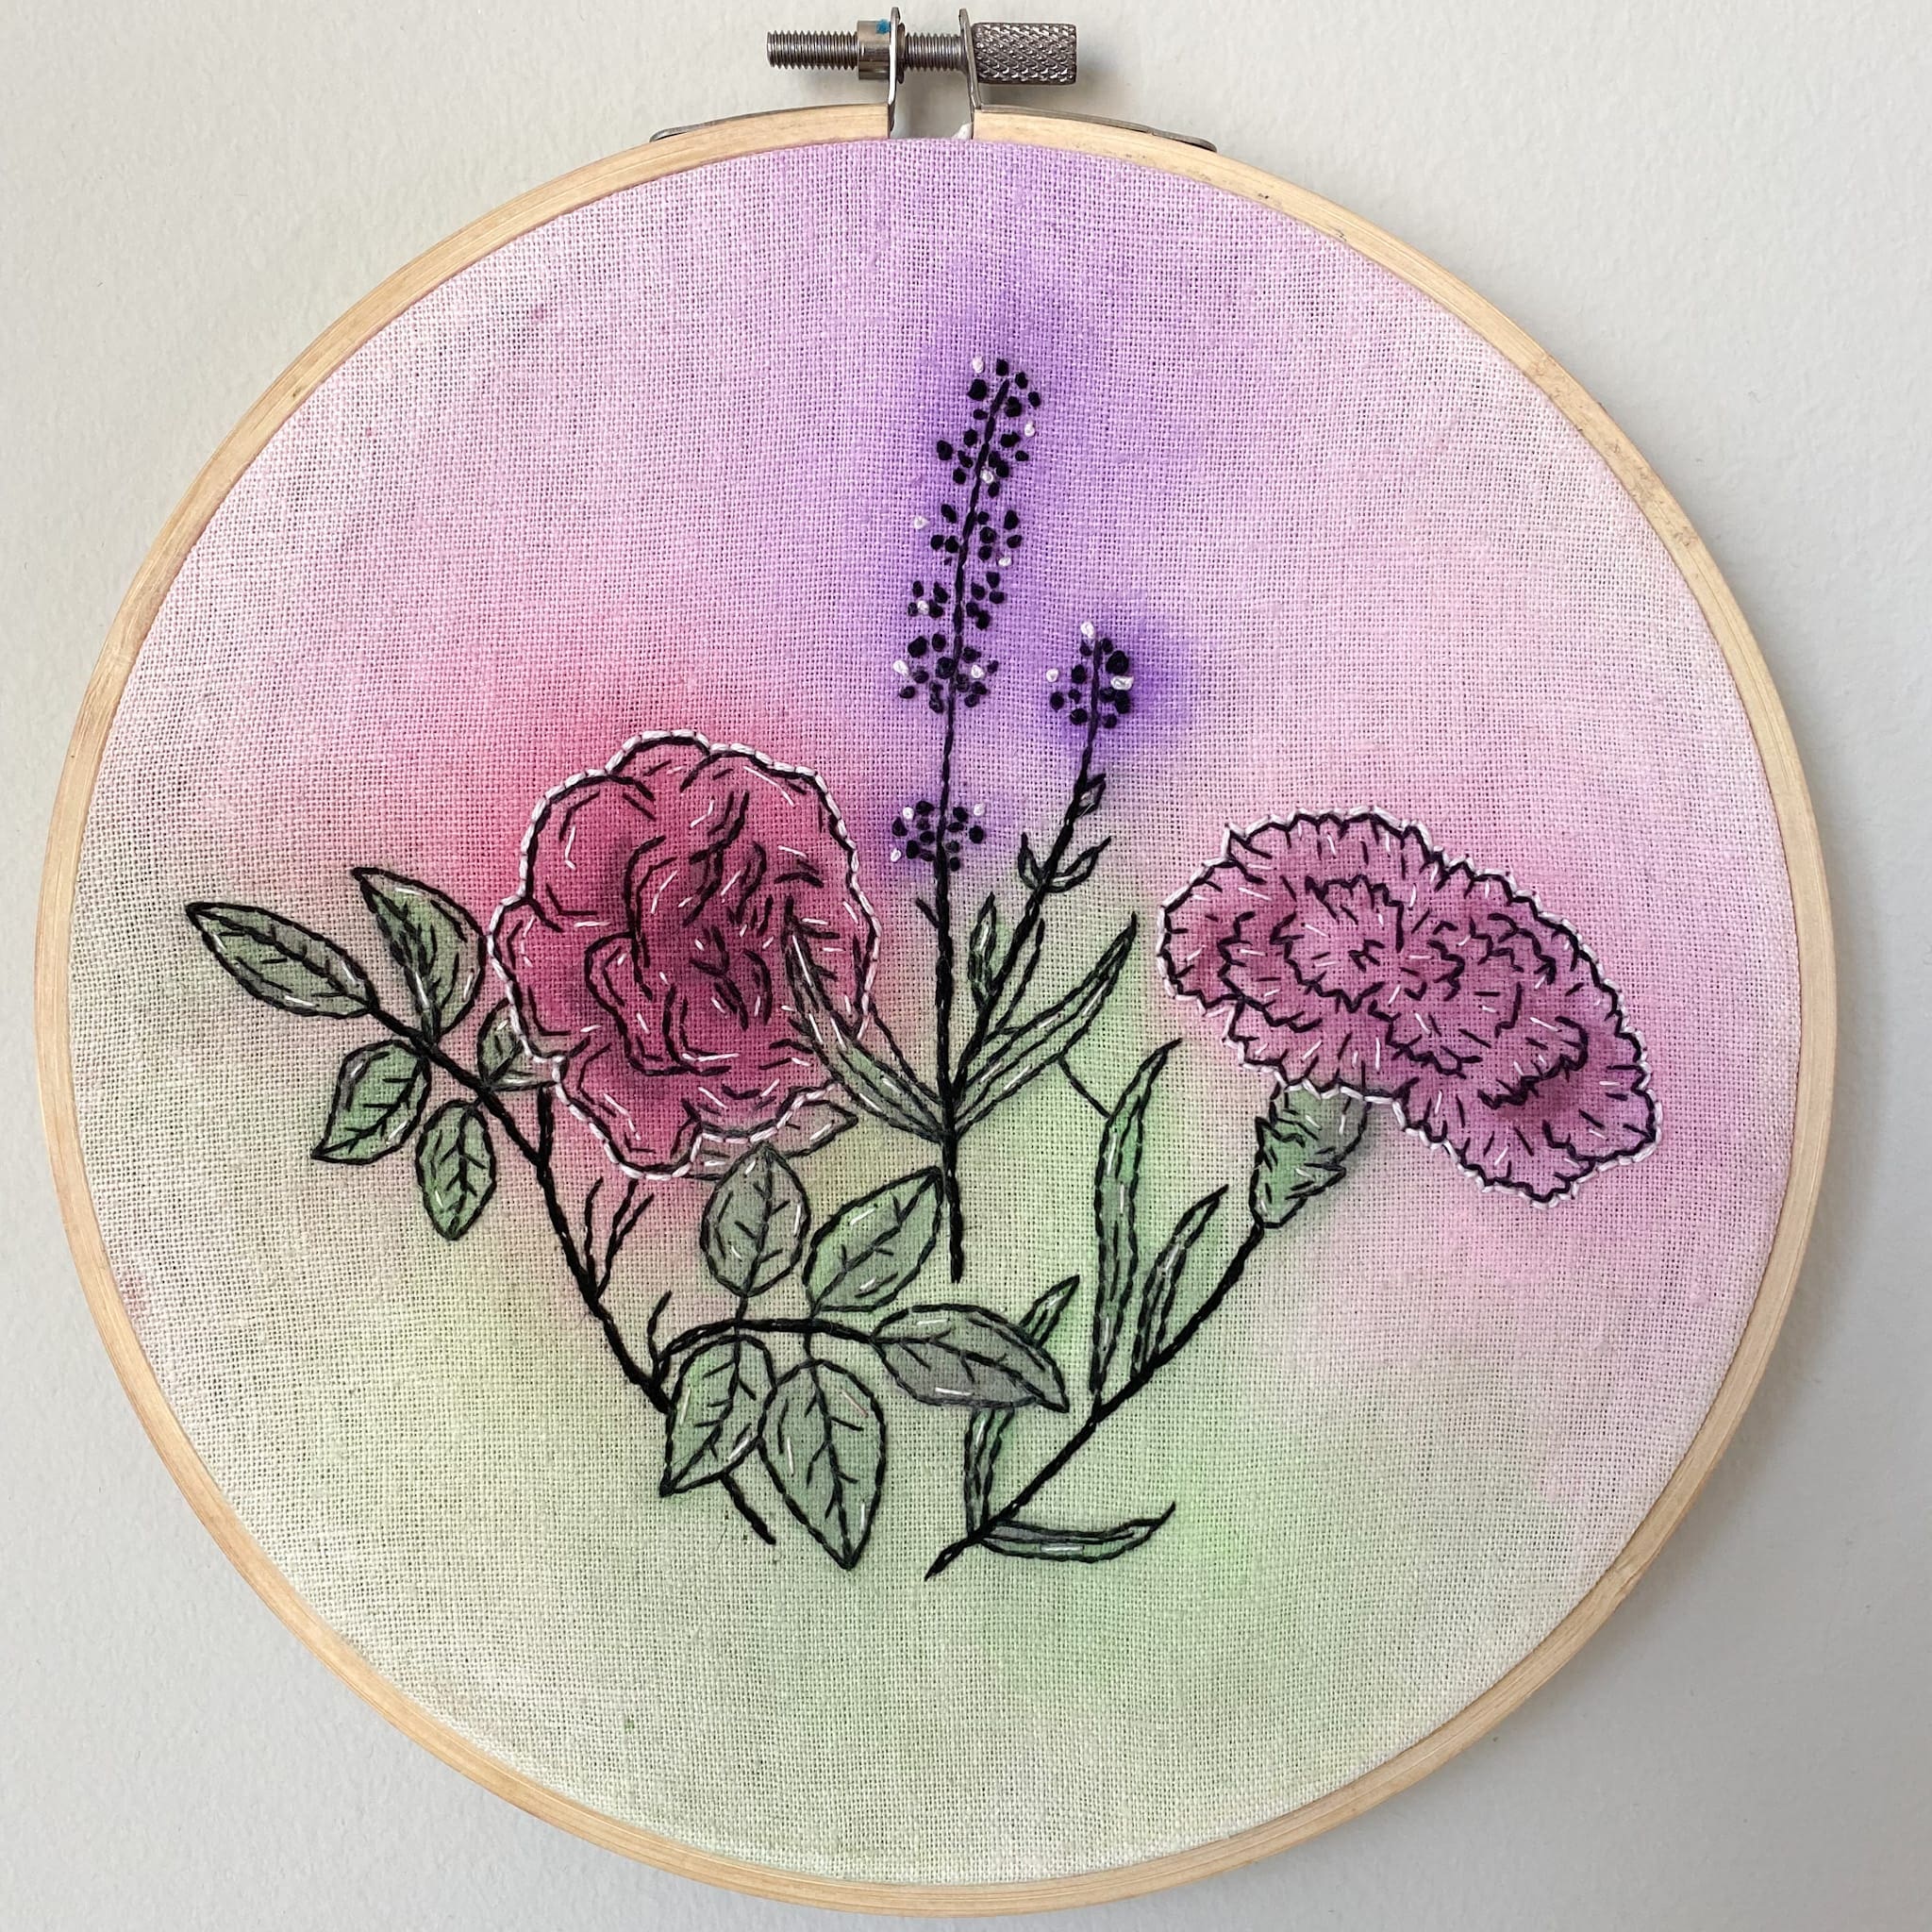 cross-stitch of pink and purple flowers on a hoop